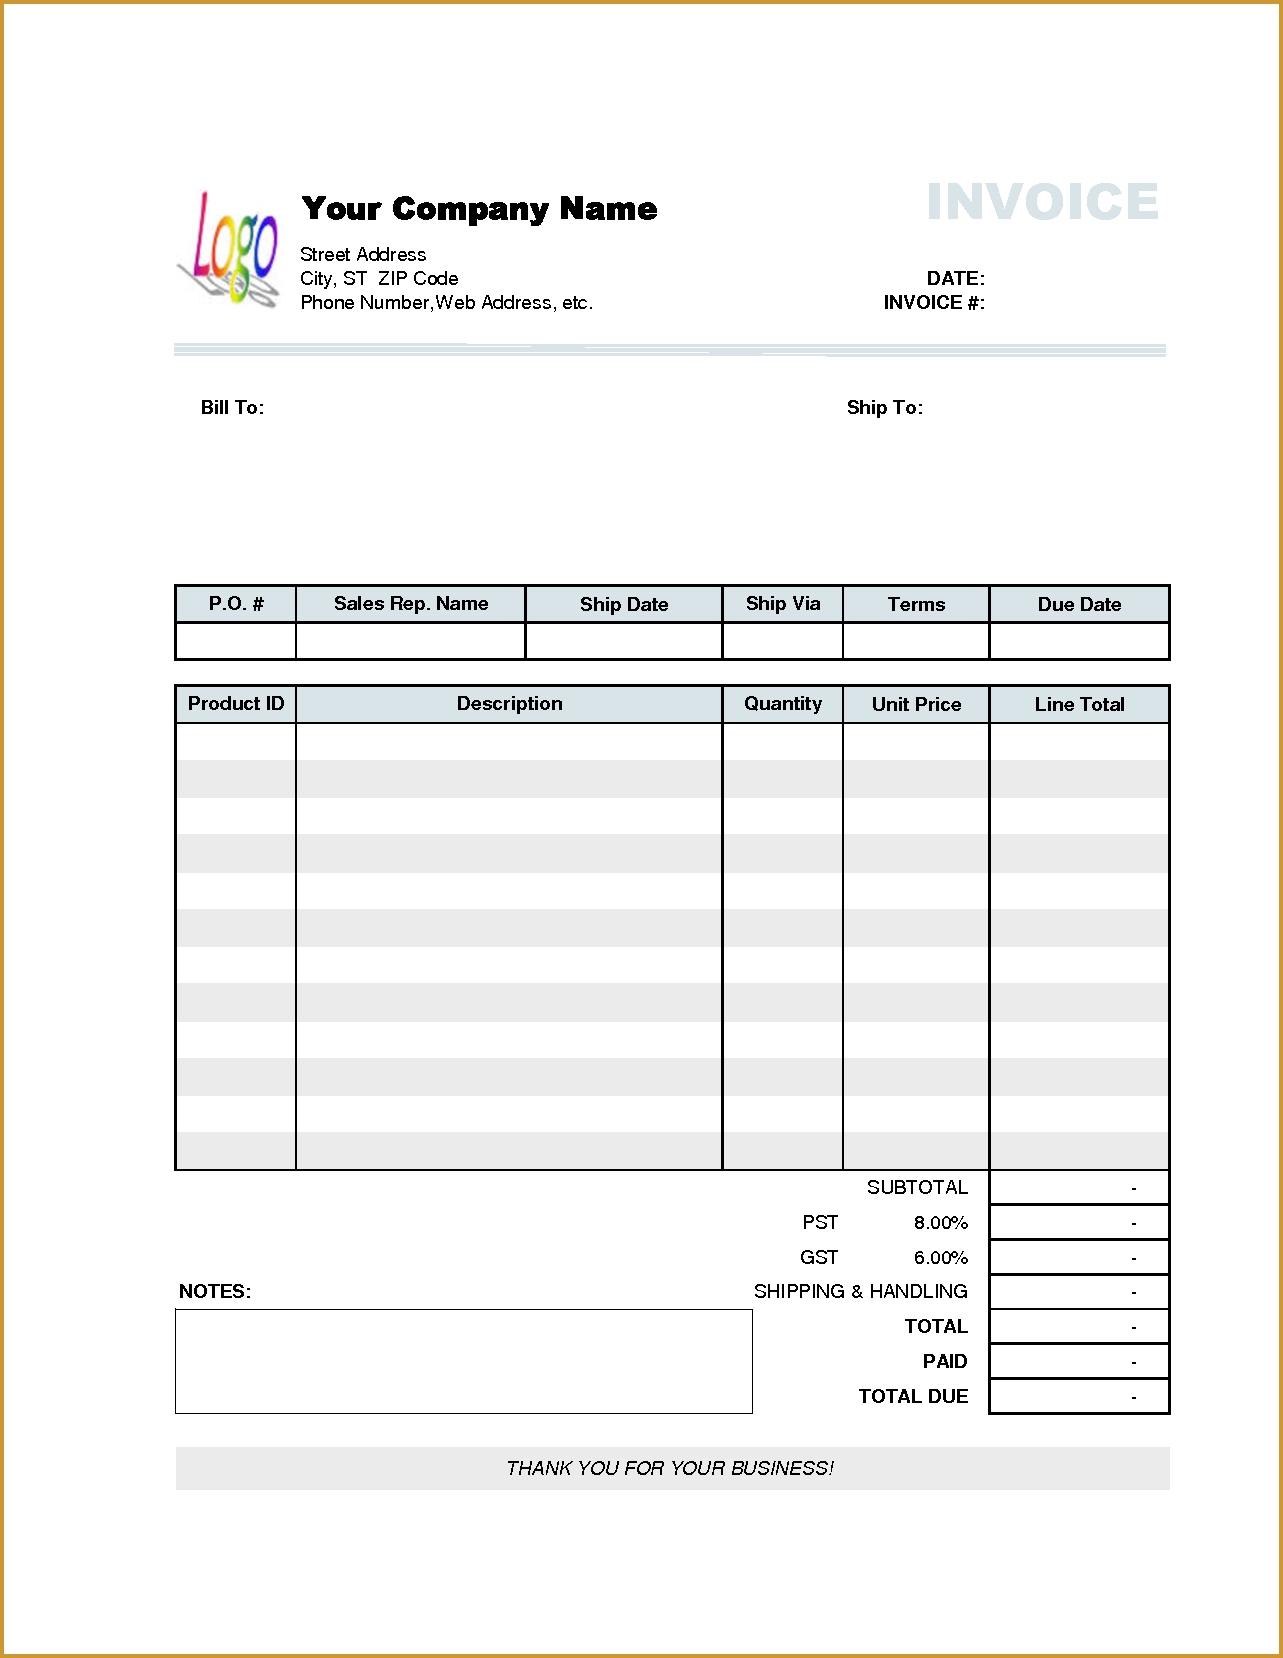 11 excel invoice templates jumbocover form invoice excel